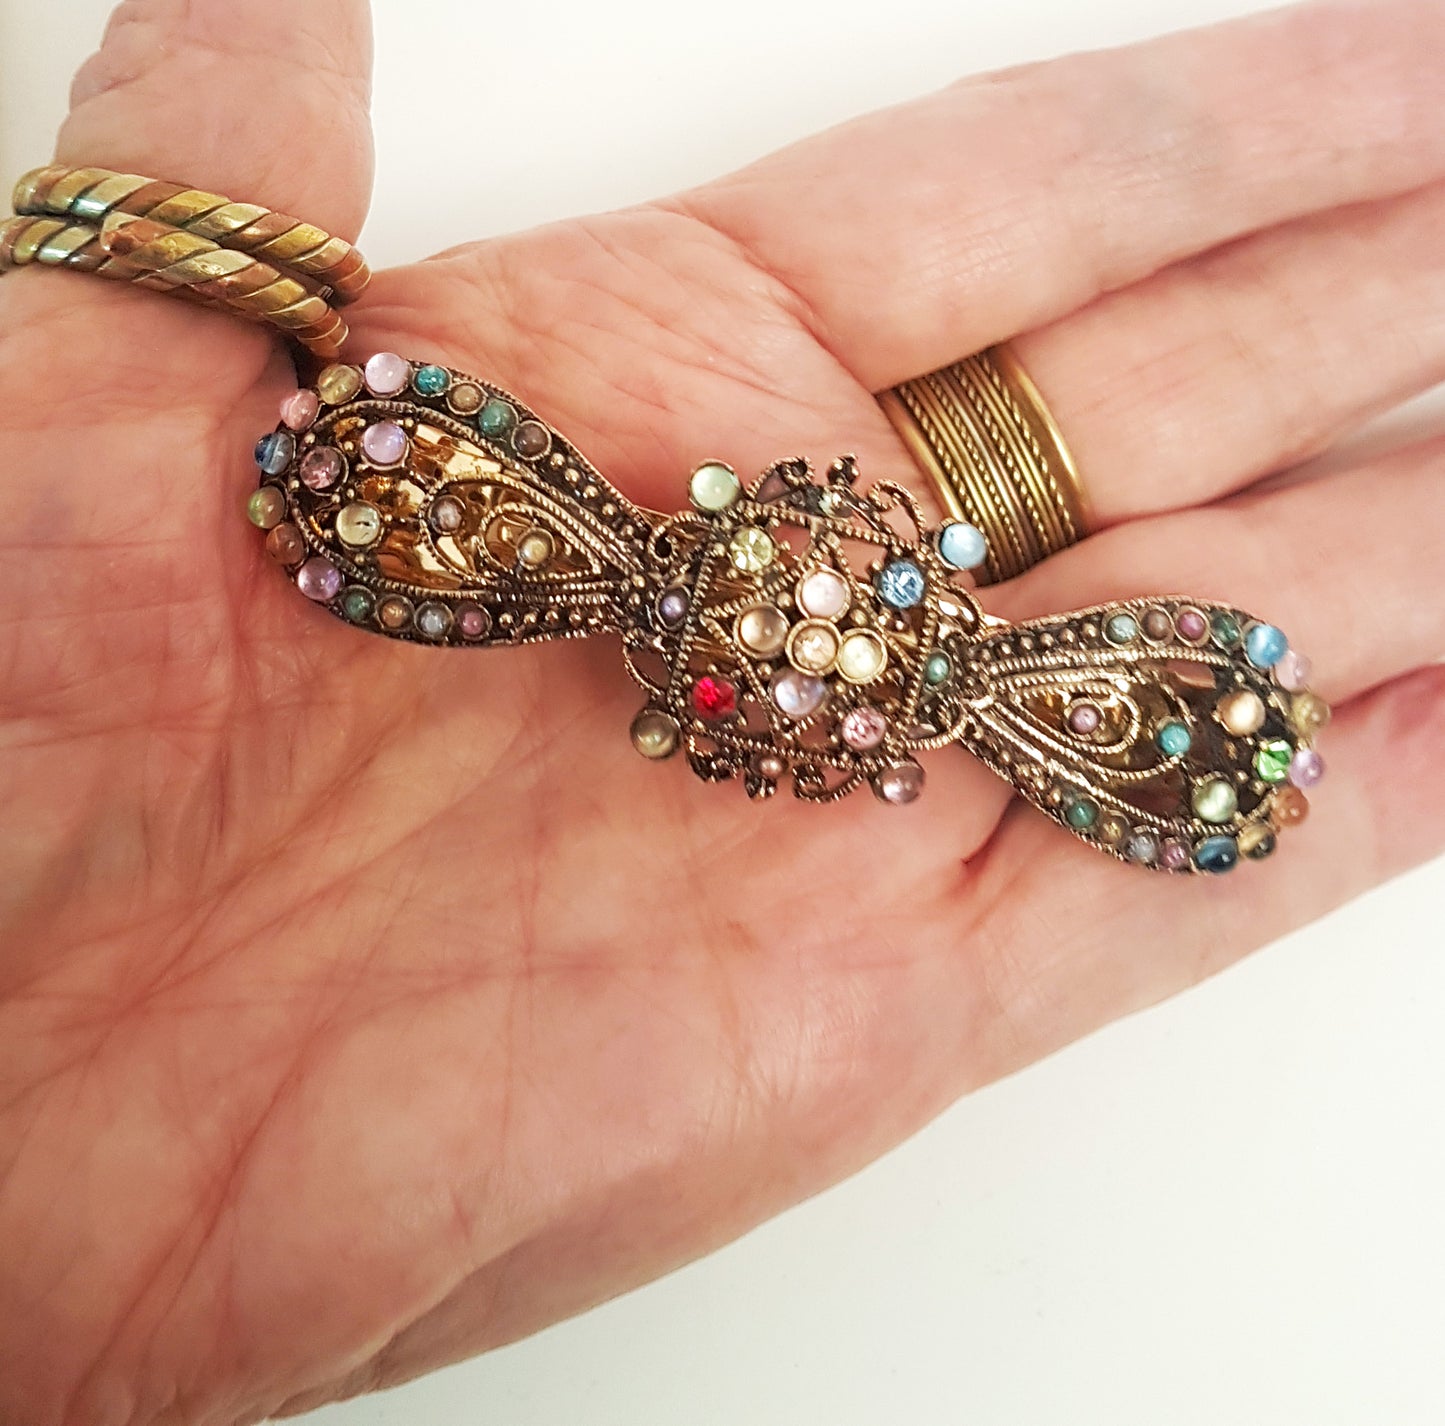 Vintage rhinestone hairclip barrette. Antique silver finish hair jewelry. Bow shaped hair clip studded with colorful stones. 3.75 inches.